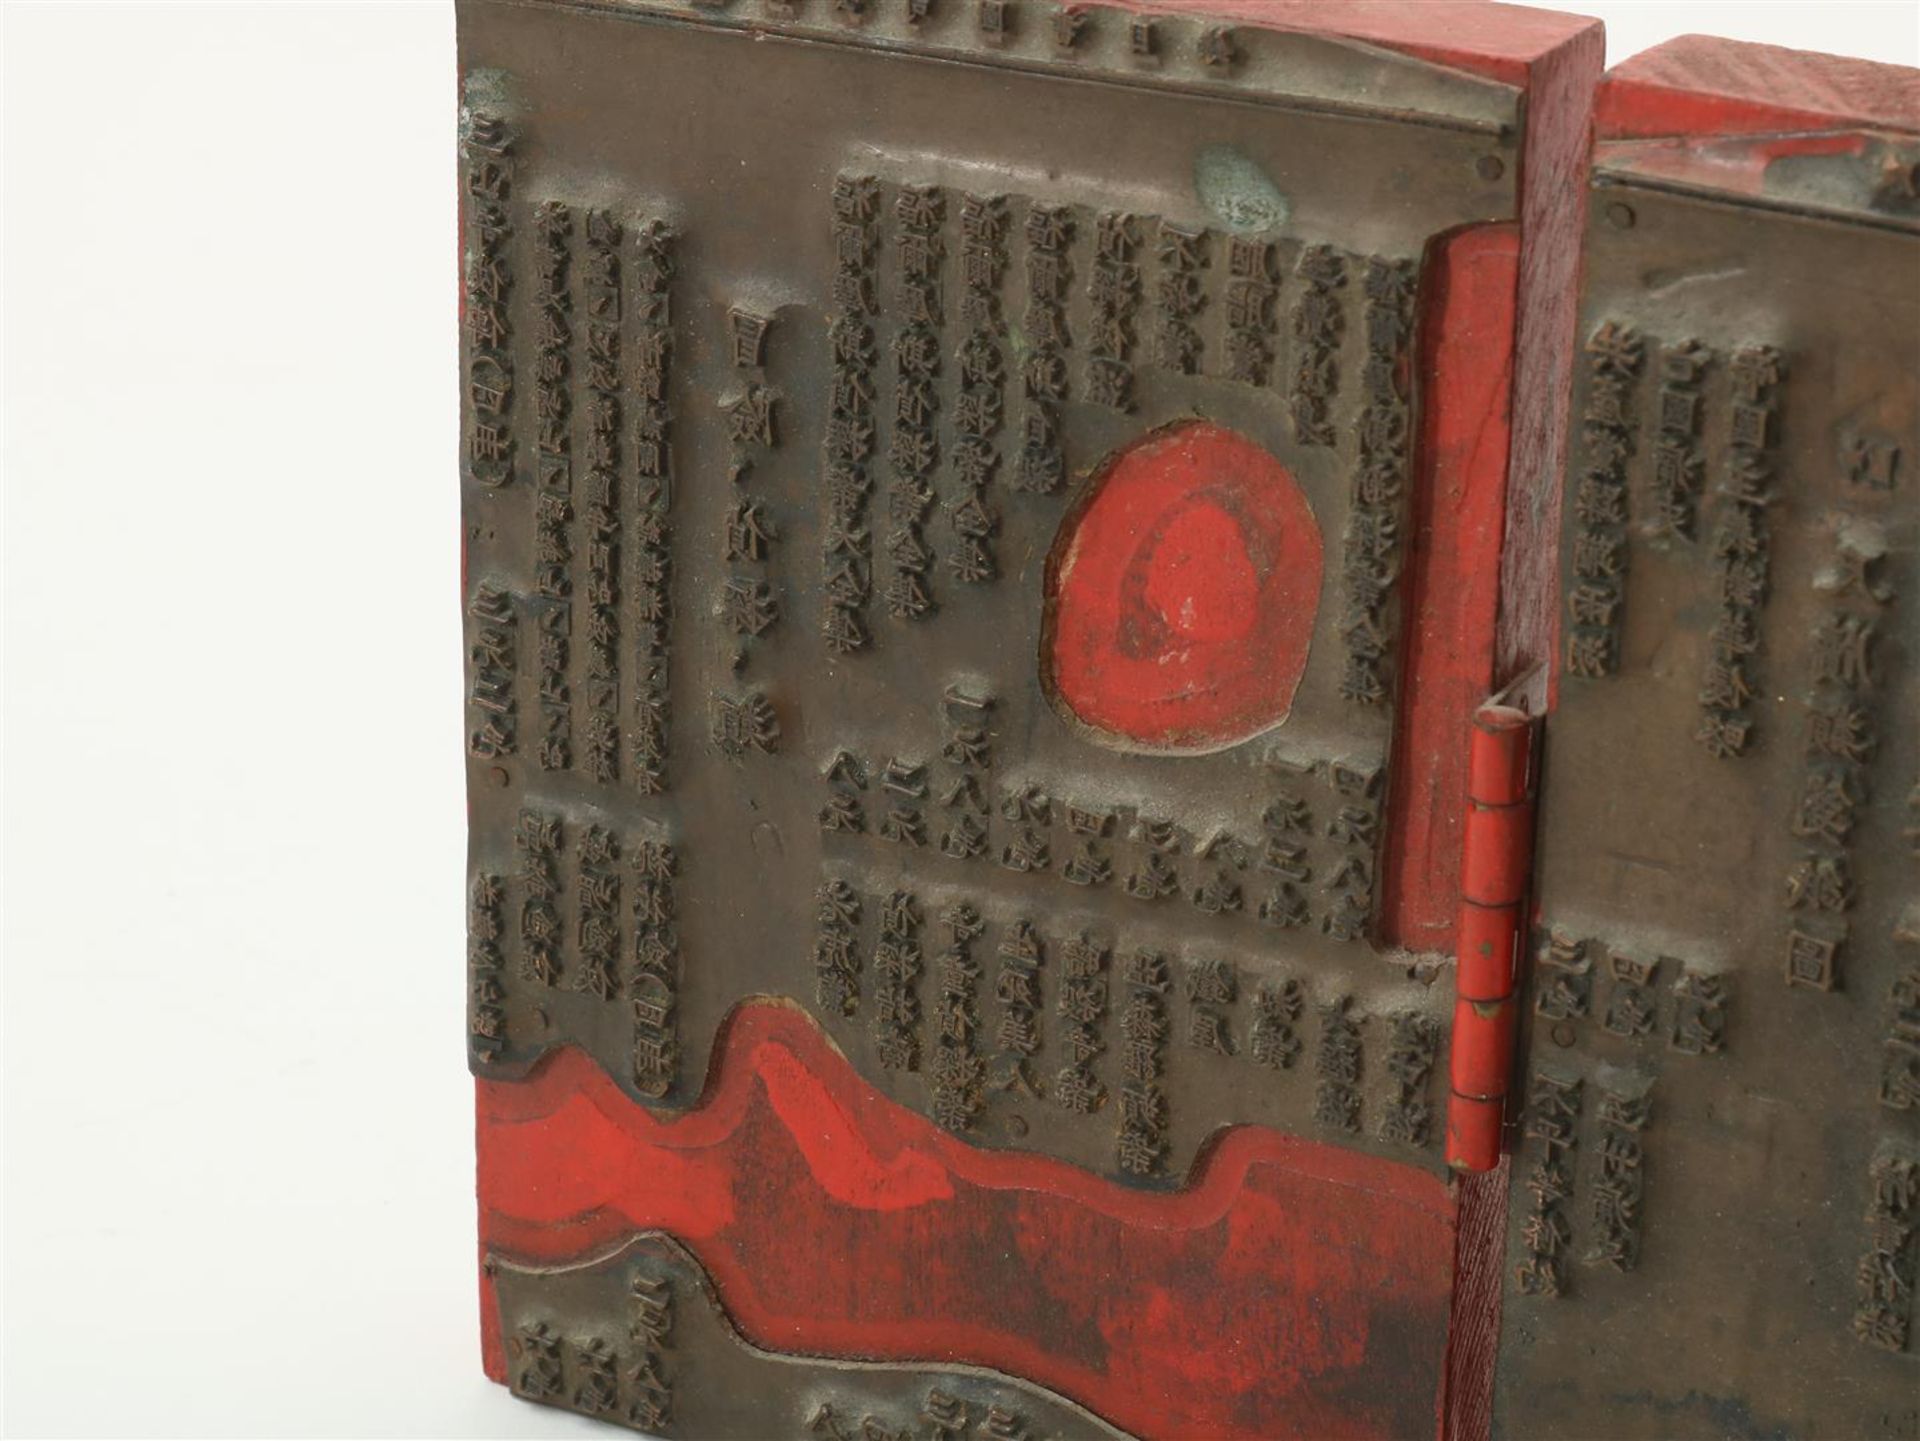 A triptych made from Chinese printing plates, stamping plates, ca. 1900, 16 x 34 cm. - Image 2 of 4